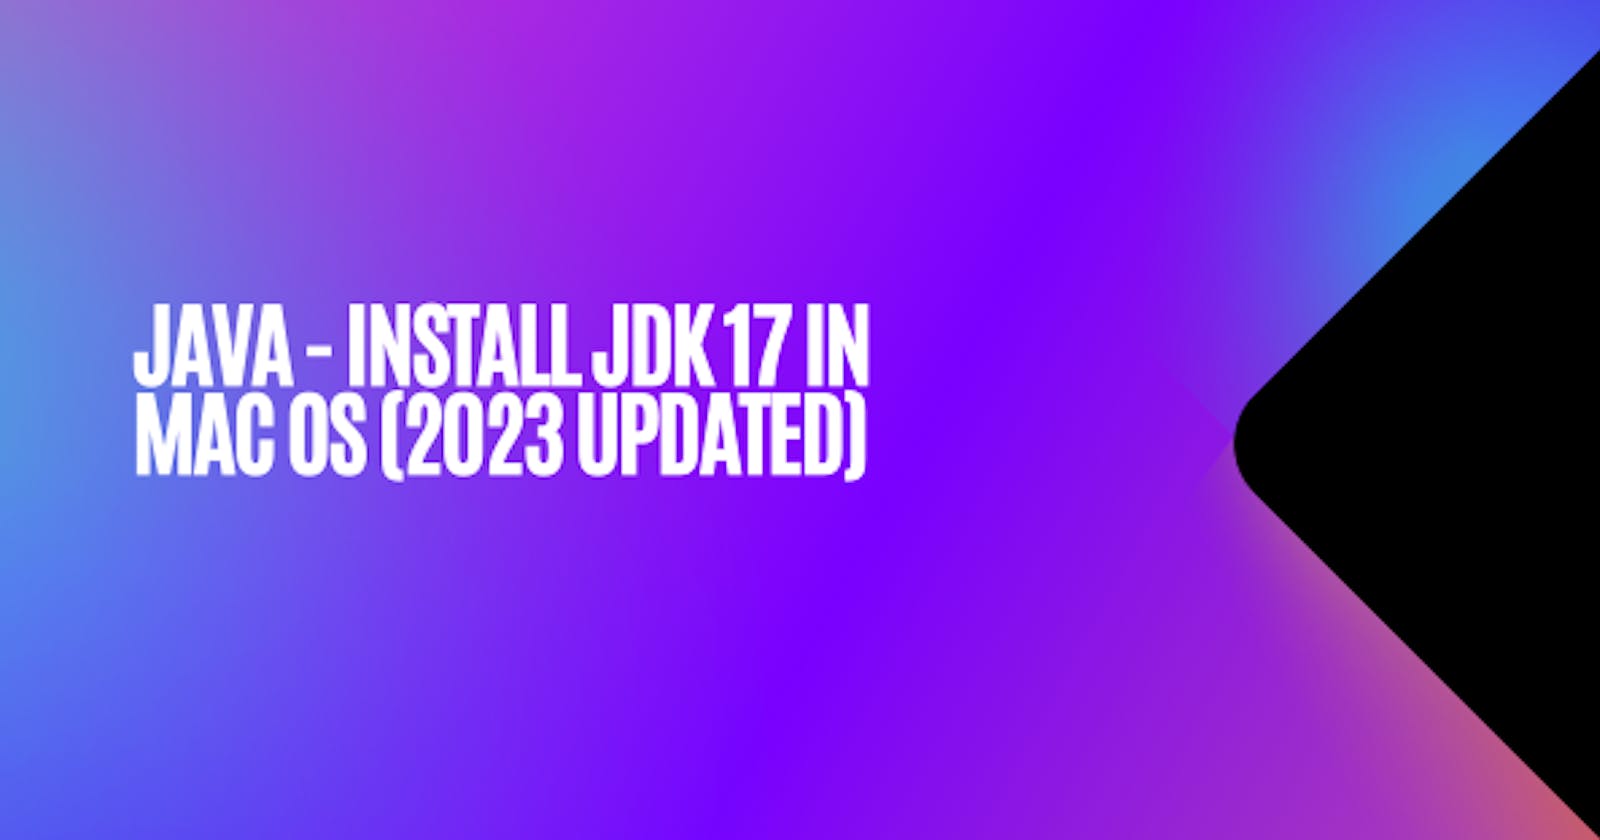 Java - Install JDK 17 in MacOS (2023 Updated)